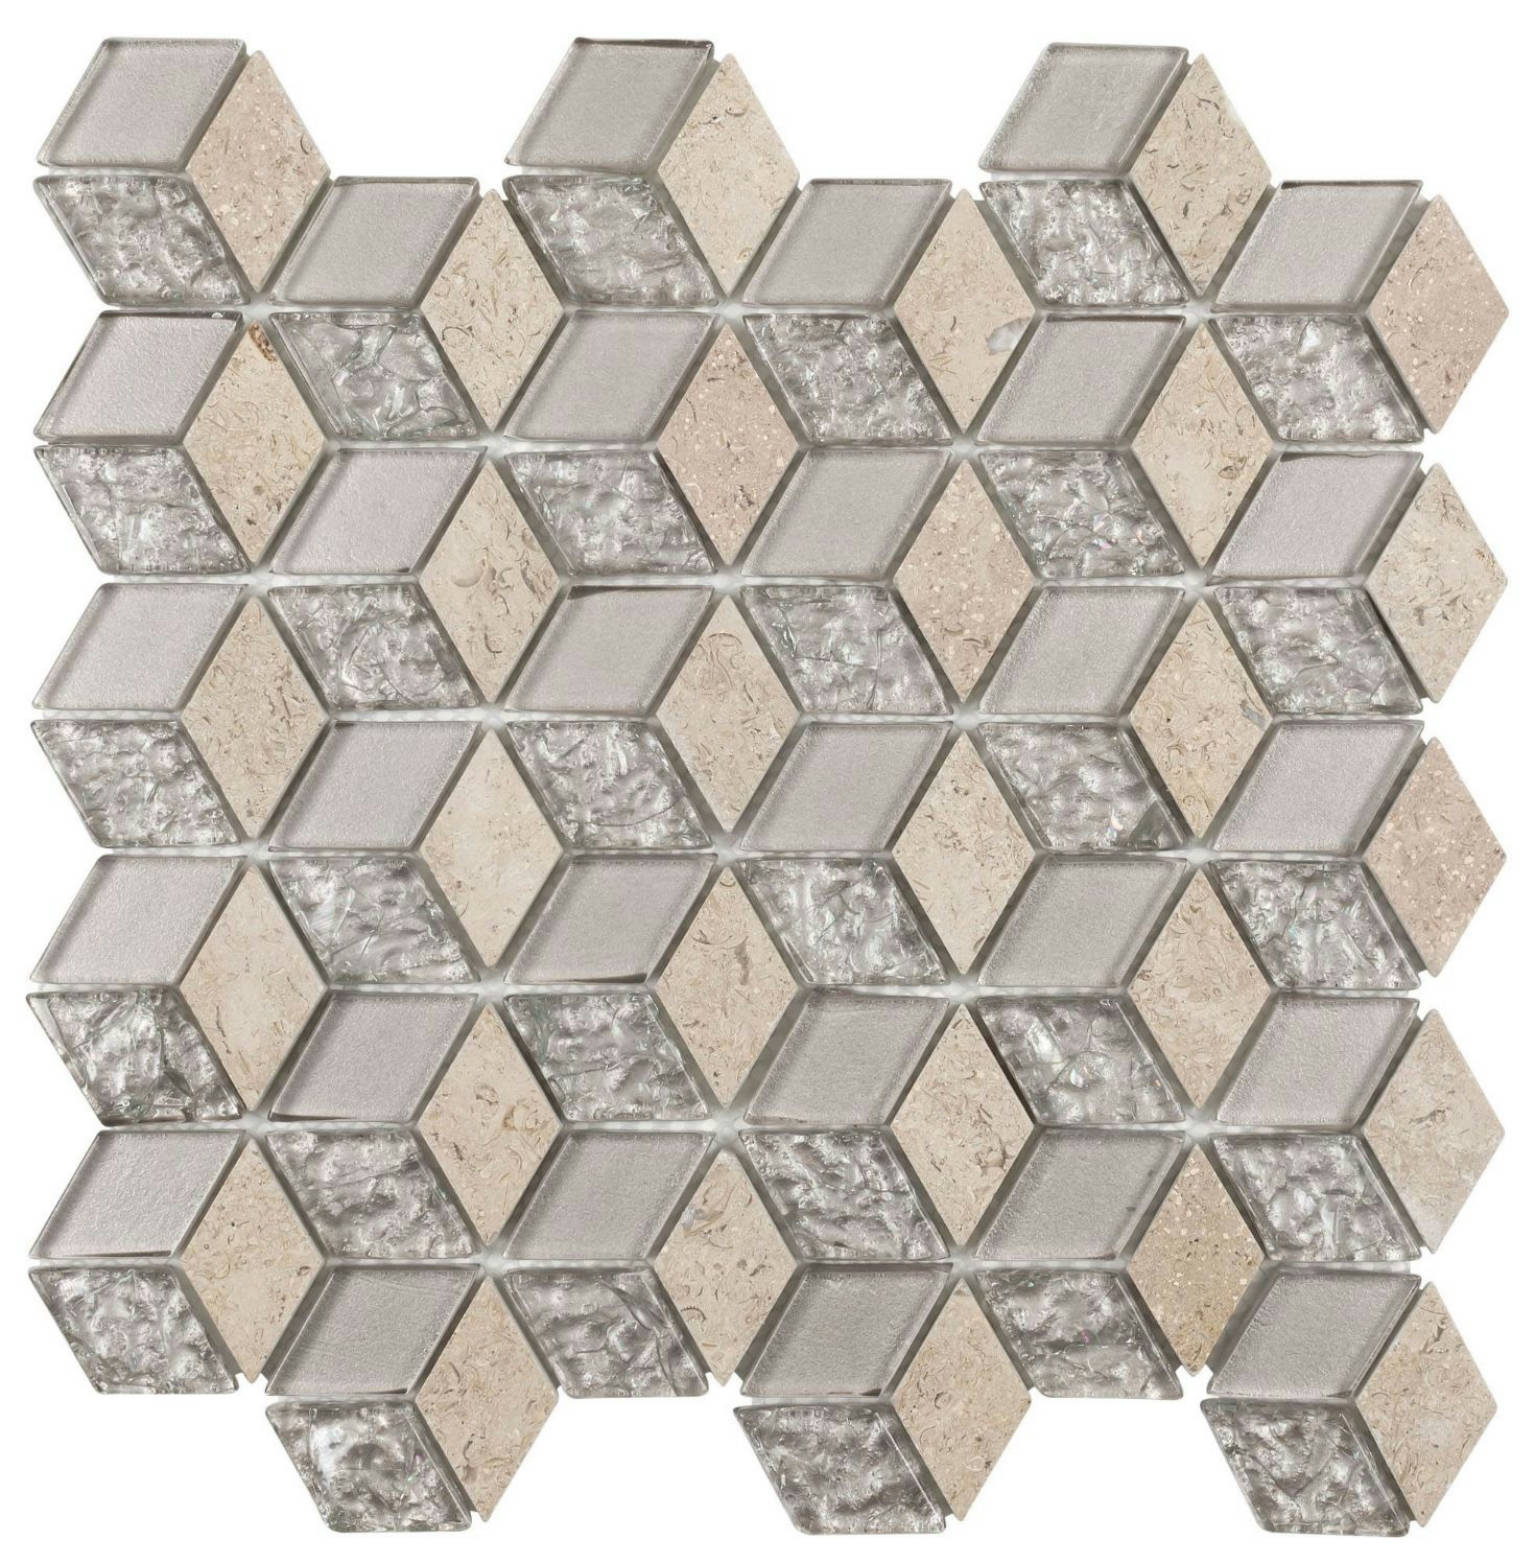 DIA-237 | Stones & More | Finest selection of Mosaics, Glass, Tile and Stone